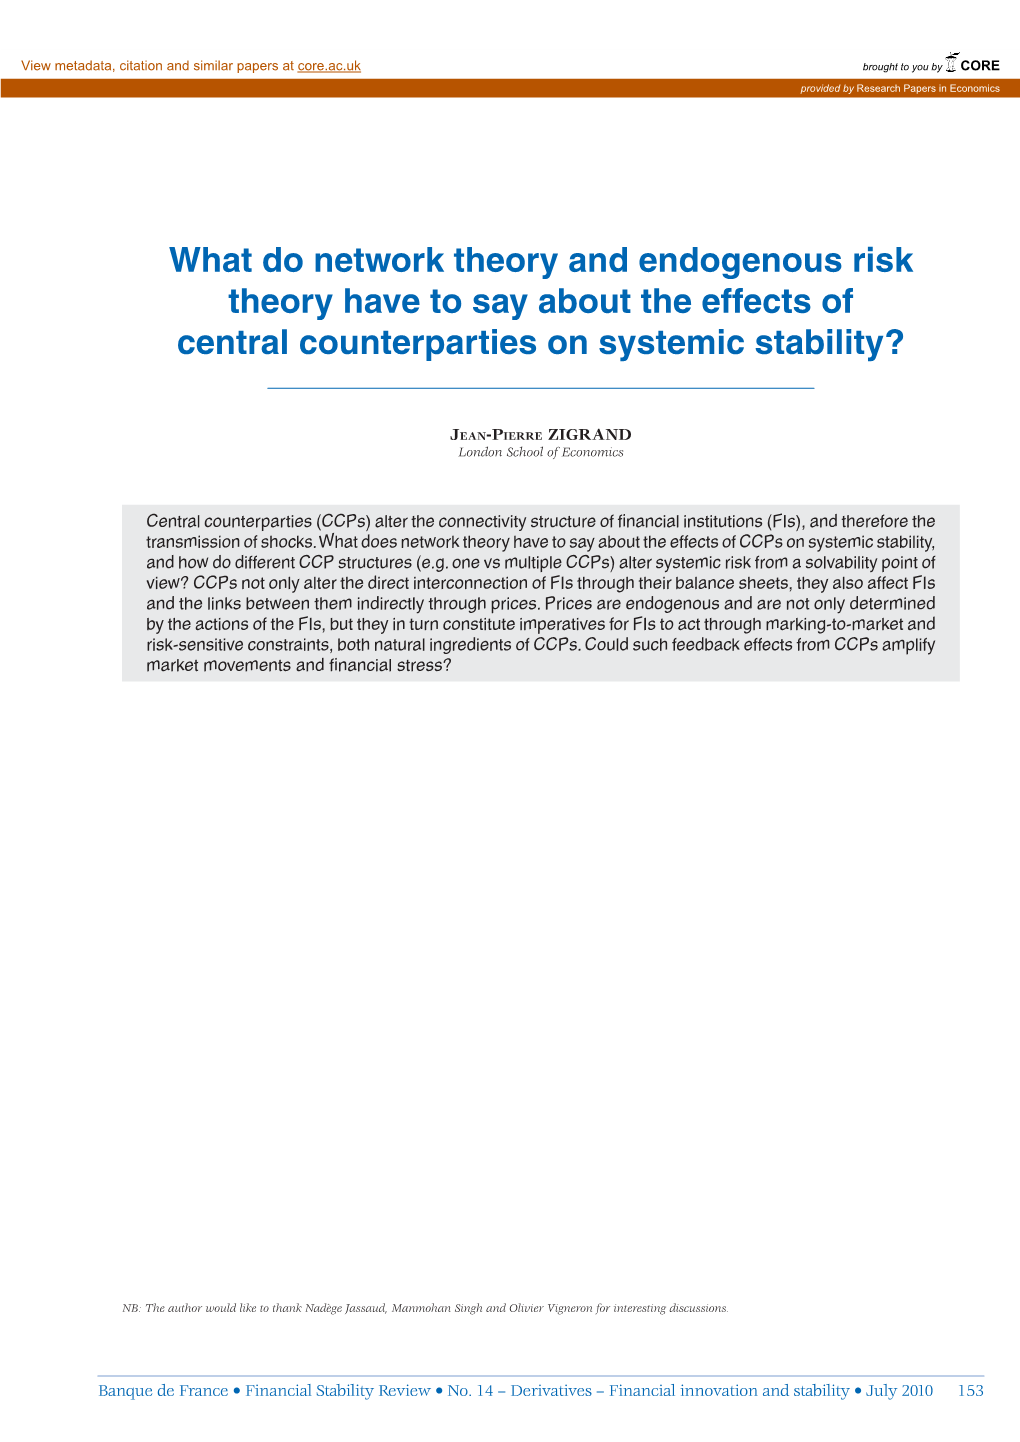 Endogenous Risk Theory Have to Say About the Effects of Central Counterparties on Systemic Stability?